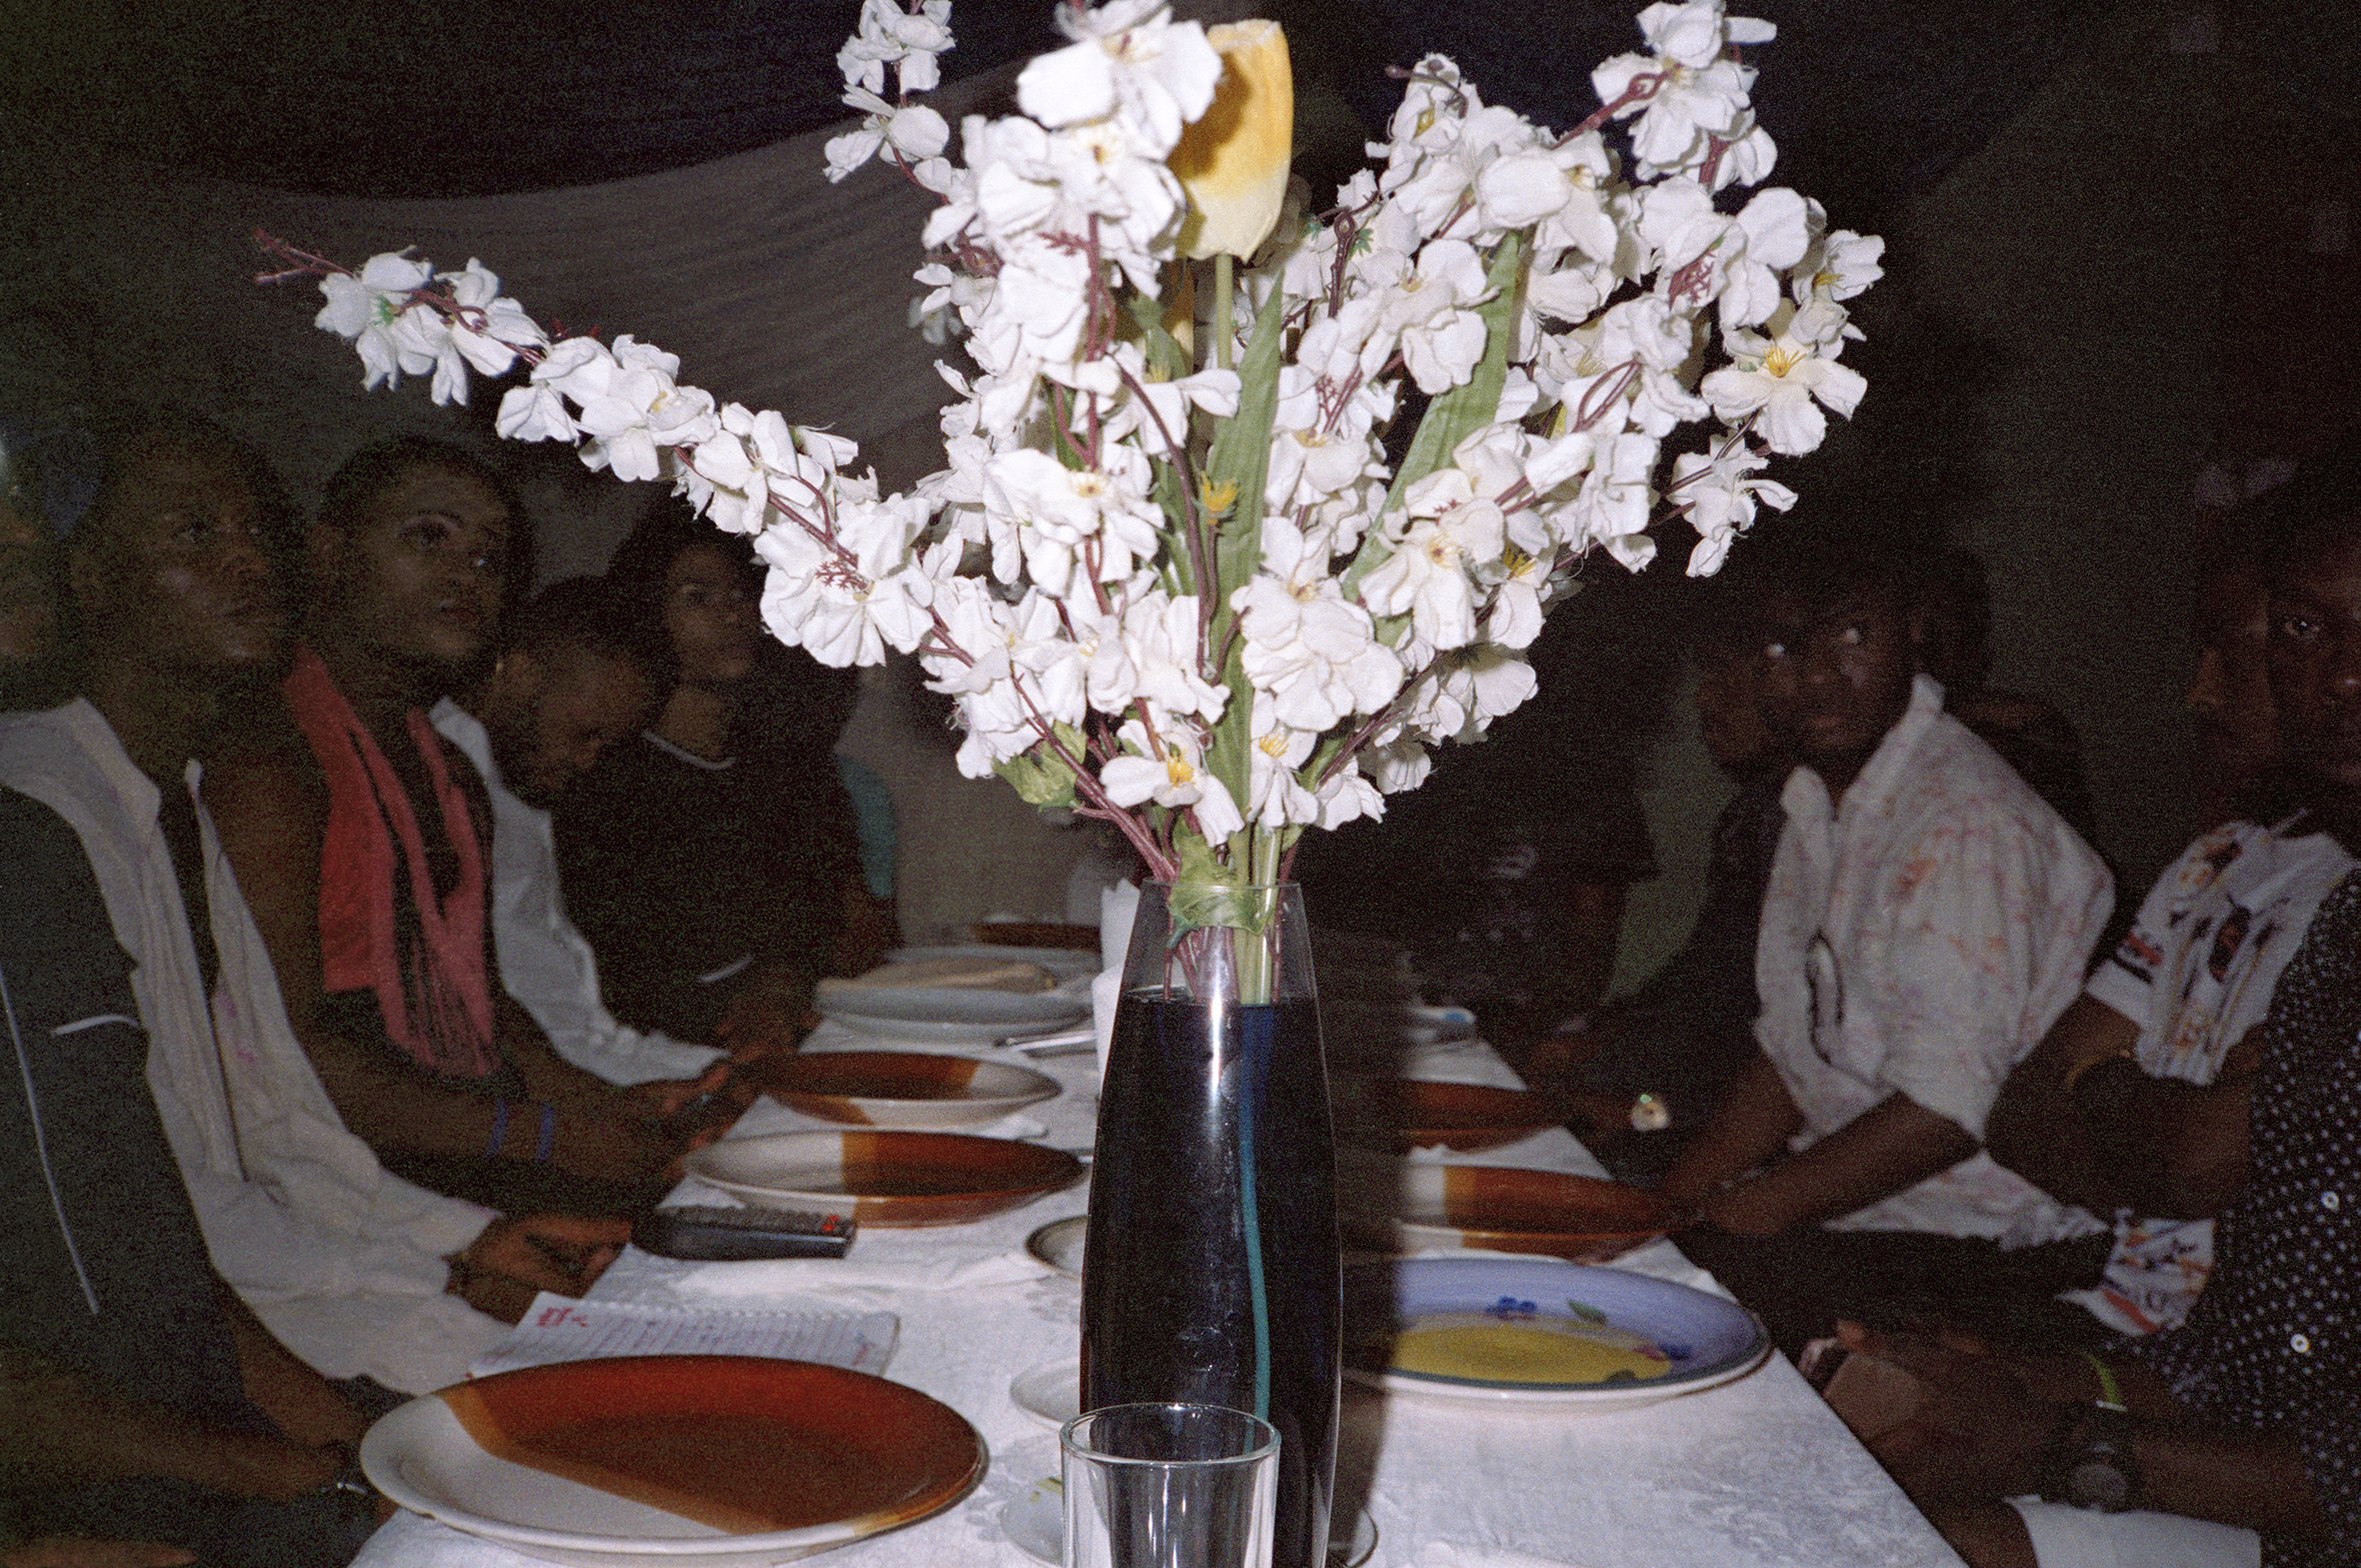 A-farewell-dinner-with-Daniel--Ruby--James-Brown--Tonnex--Thom-Smith--Mohammed--Sodiq--Mr-Morrison--Lil-B--Olumide--Icon--Nonso-2019-Hand-printed-silver-gelatin-print.jpeg